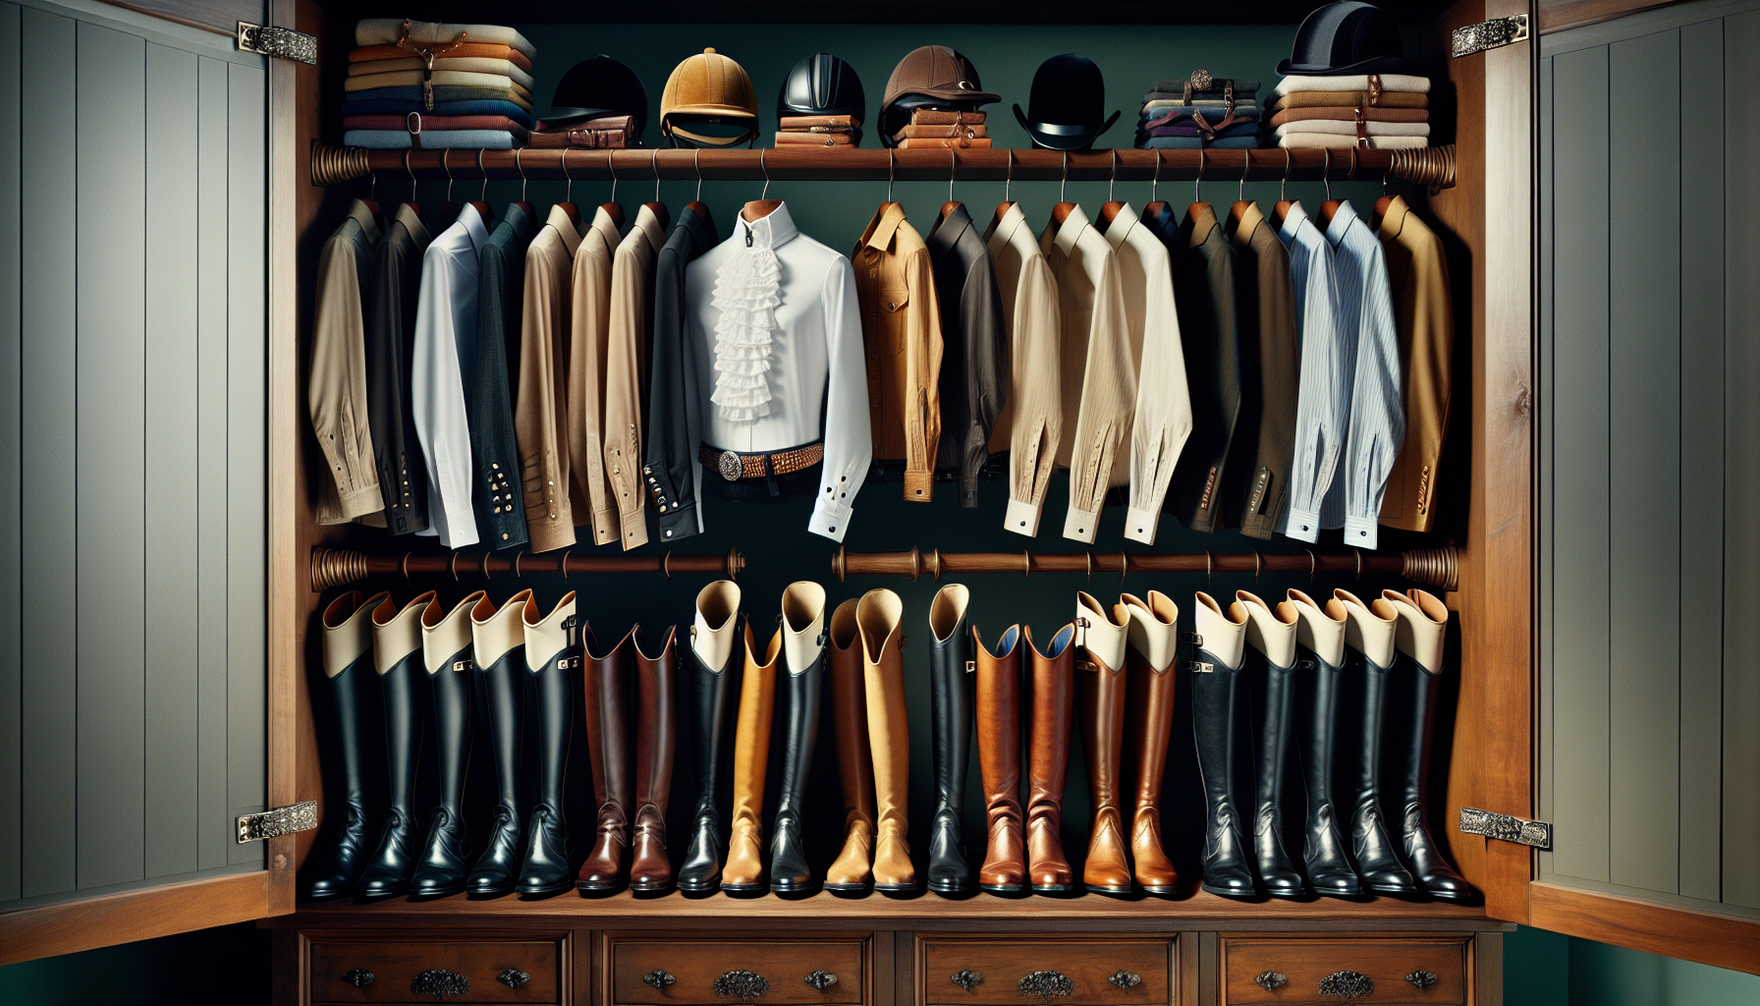 Imagine transforming your equestrian wardrobe. Picture a wooden wardrobe filled with diverse riding outfits. On the right side, a collection of black and tan leather riding boots meticulously polished